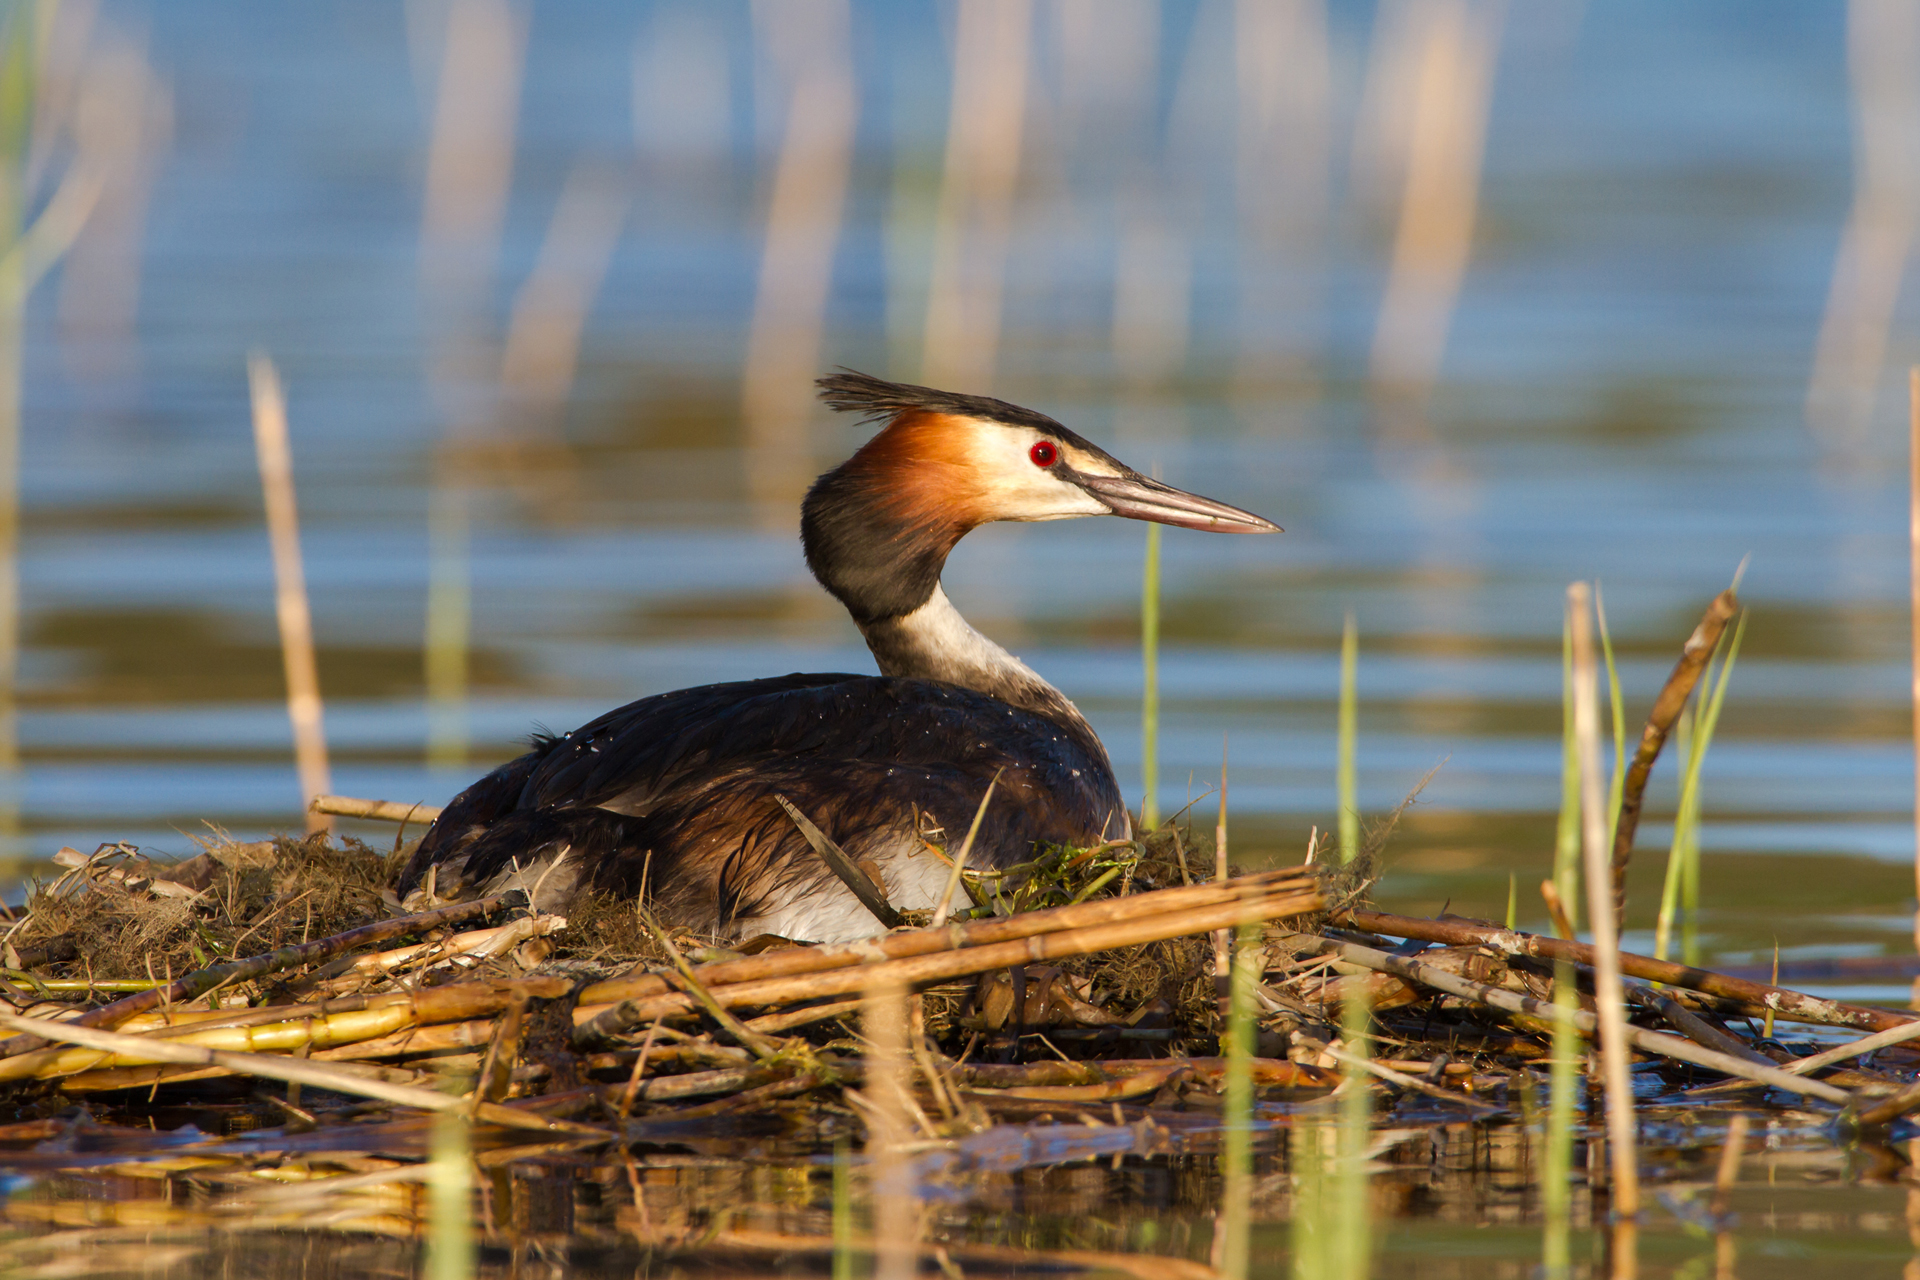 A great crested grebe at its nest / Photo: V-M. Suhonen